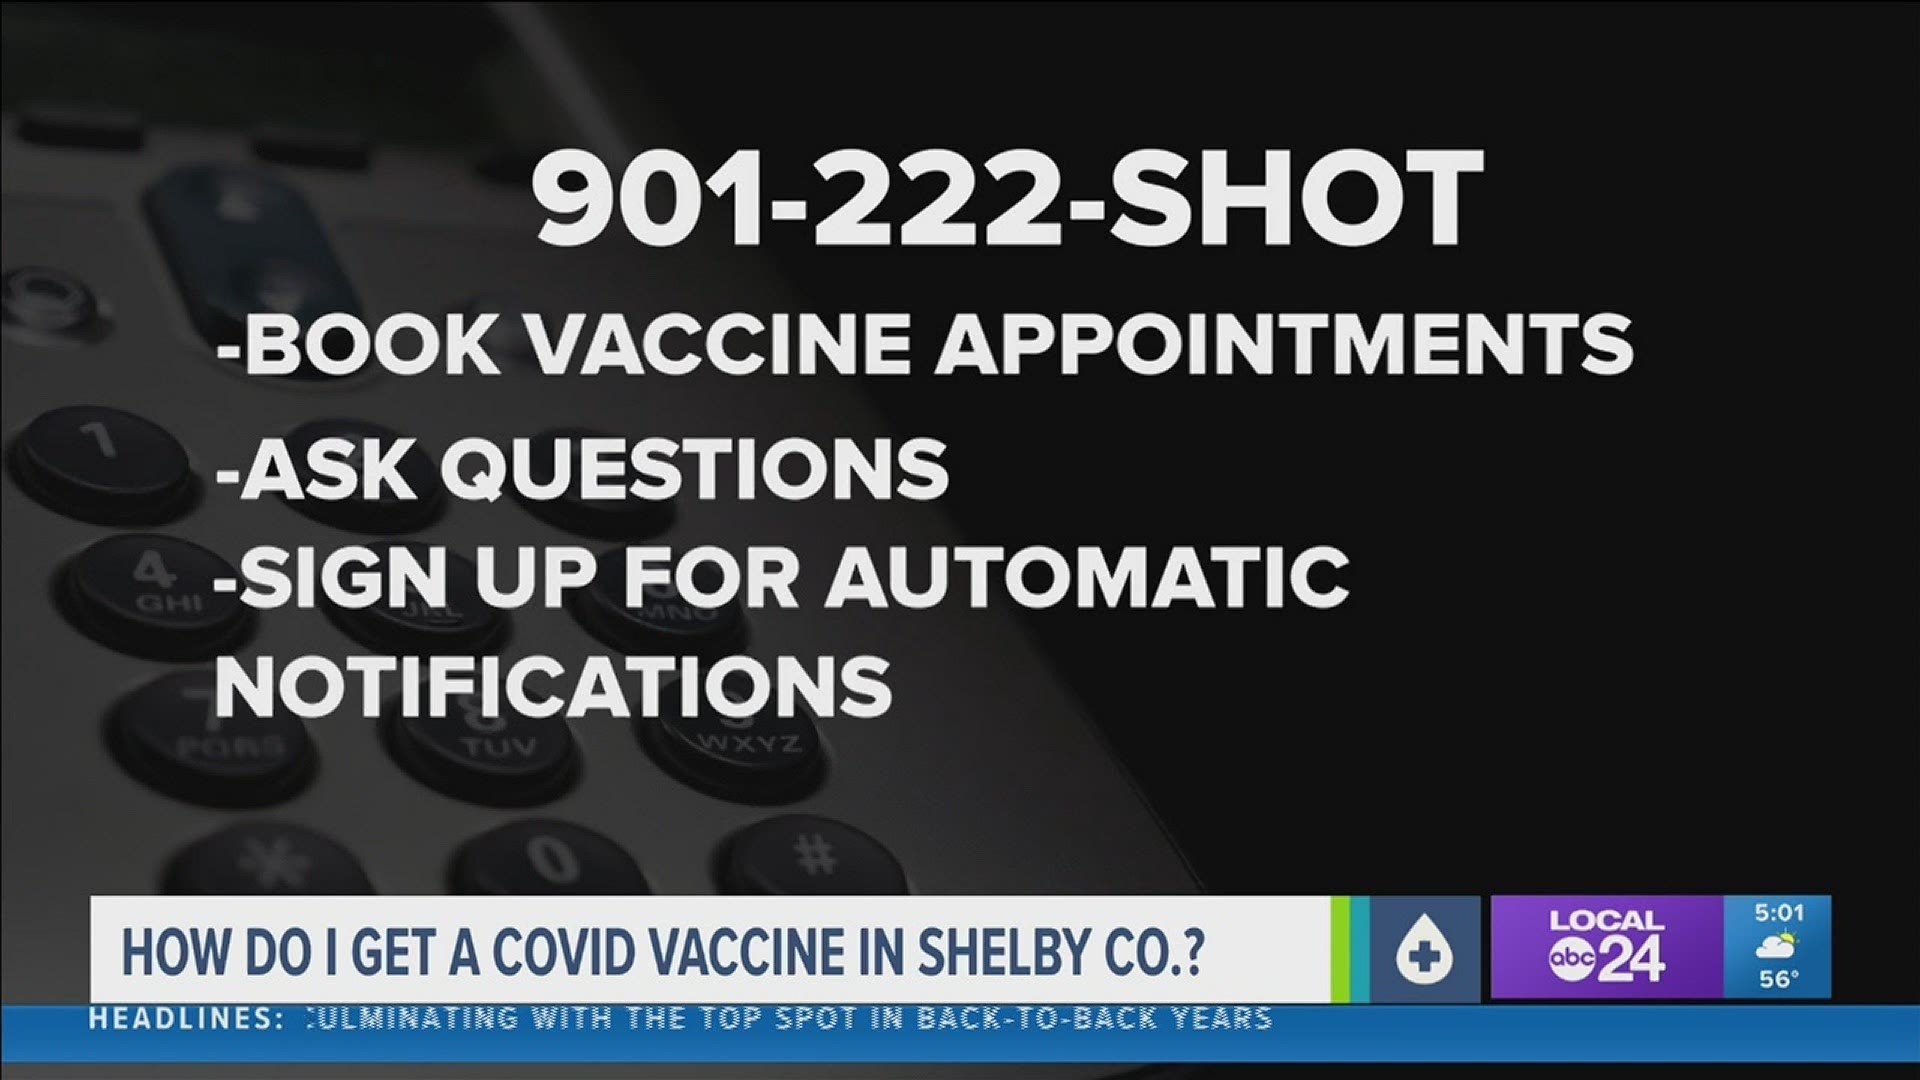 The county will notify people on the waitlist to come and get vaccinated if there are no shows, extra appointments, or additional vaccines.